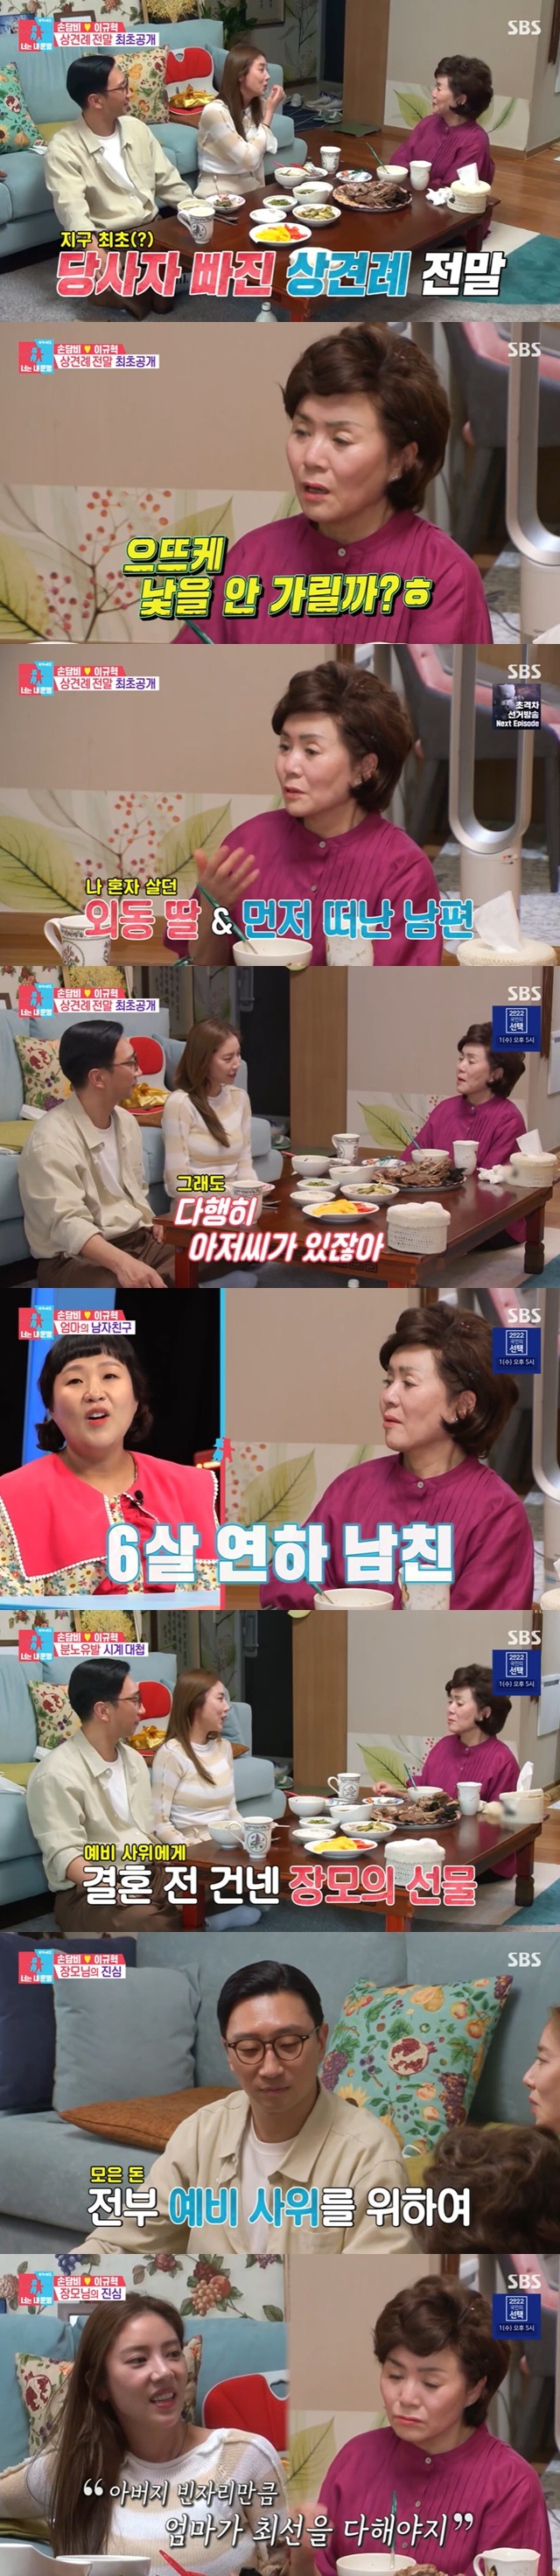 Son Dam-bi has told me from the meeting to Moms love affair and the clock gift.On May 30, SBS Sangsangmong Season 2 - You Are My Destiny, Son Dam-bi met Mom with her husband Lee Kyou-hyuk.On this day, Son Dam-bis mother met her daughter and son-in-law and gave her a duck to her and wanted to be a grandchild.Son Dam-bi also said he did not think about the child, but now he has changed his mind.Son Dam-bi doesnt have a separate gender, but Lee Kyou-hyuk wants a son.Son Dam-bi then questioned Lee Kyou-hyuks first impression, saying his mother didnt believe him when he first told the marriage story.Ive seen her so handsome and ugly, shes gone and so charismatic, like a man, and shes not strange to me, shes friendly and nice, and shes so happy inside.I drank as soon as I met him that day.Son Dam-bi also brought up a meeting story that Son Dam-bi and Lee Kyou-hyuk did not attend.Lee Kyou-hyuk said, I checked it once because my appointment time was up, but I cant move it to adults.I contacted you too late and said, I can not cancel it, so please just eat. Son Dam-bis mother said, I am a strange woman.How can I not cover my face? He recalled the meeting with his first friends and laughed.When Son Dam-bi asked, What did you say when we were gone? her mother said, Ive been living. Ive been (talking) a lot. (Sadon) just listens.I was very good at meeting you. Son Dam-bis mother said that she was lonely people because she was speaking a lot.Where is the only person who leaves the house and says that after my father, I will tell you.So Son Dam-bi said, I have friends and fortunately I have The Man from Nowhere.Son Dam-bis mother is in a relationship with her husband and her six-year-old son after she was widowed. Son Dam-bi is my mothers ability and reflects her mothers love.Im 75 now, and Im not okay with a boyfriend at this age, said Son Dam-bi, who was also nervous.If Mother is lonely, then her child is.I gave my brother a watch the day my mother invited me to meet The Man from Nowhere, and I was a little angry at first when she told me about it, Son Dam-bi said.I know her mind, but it was all her fortune for ten years. I bought her watch a lot. I cried when I talked to her.Why do you make people hard to do what you told me to write your mother? My mother also revealed the speed of the watch that she presented to her son-in-law Lee Kyou-hyuk.I made a fixed deposit for her in case I spent it, said Son Dam-bi, and Im so happy and married that I cant do anything for you.My father is not there, but my mother has to do her best. If you live beautifully together, there is nothing more to hope for.